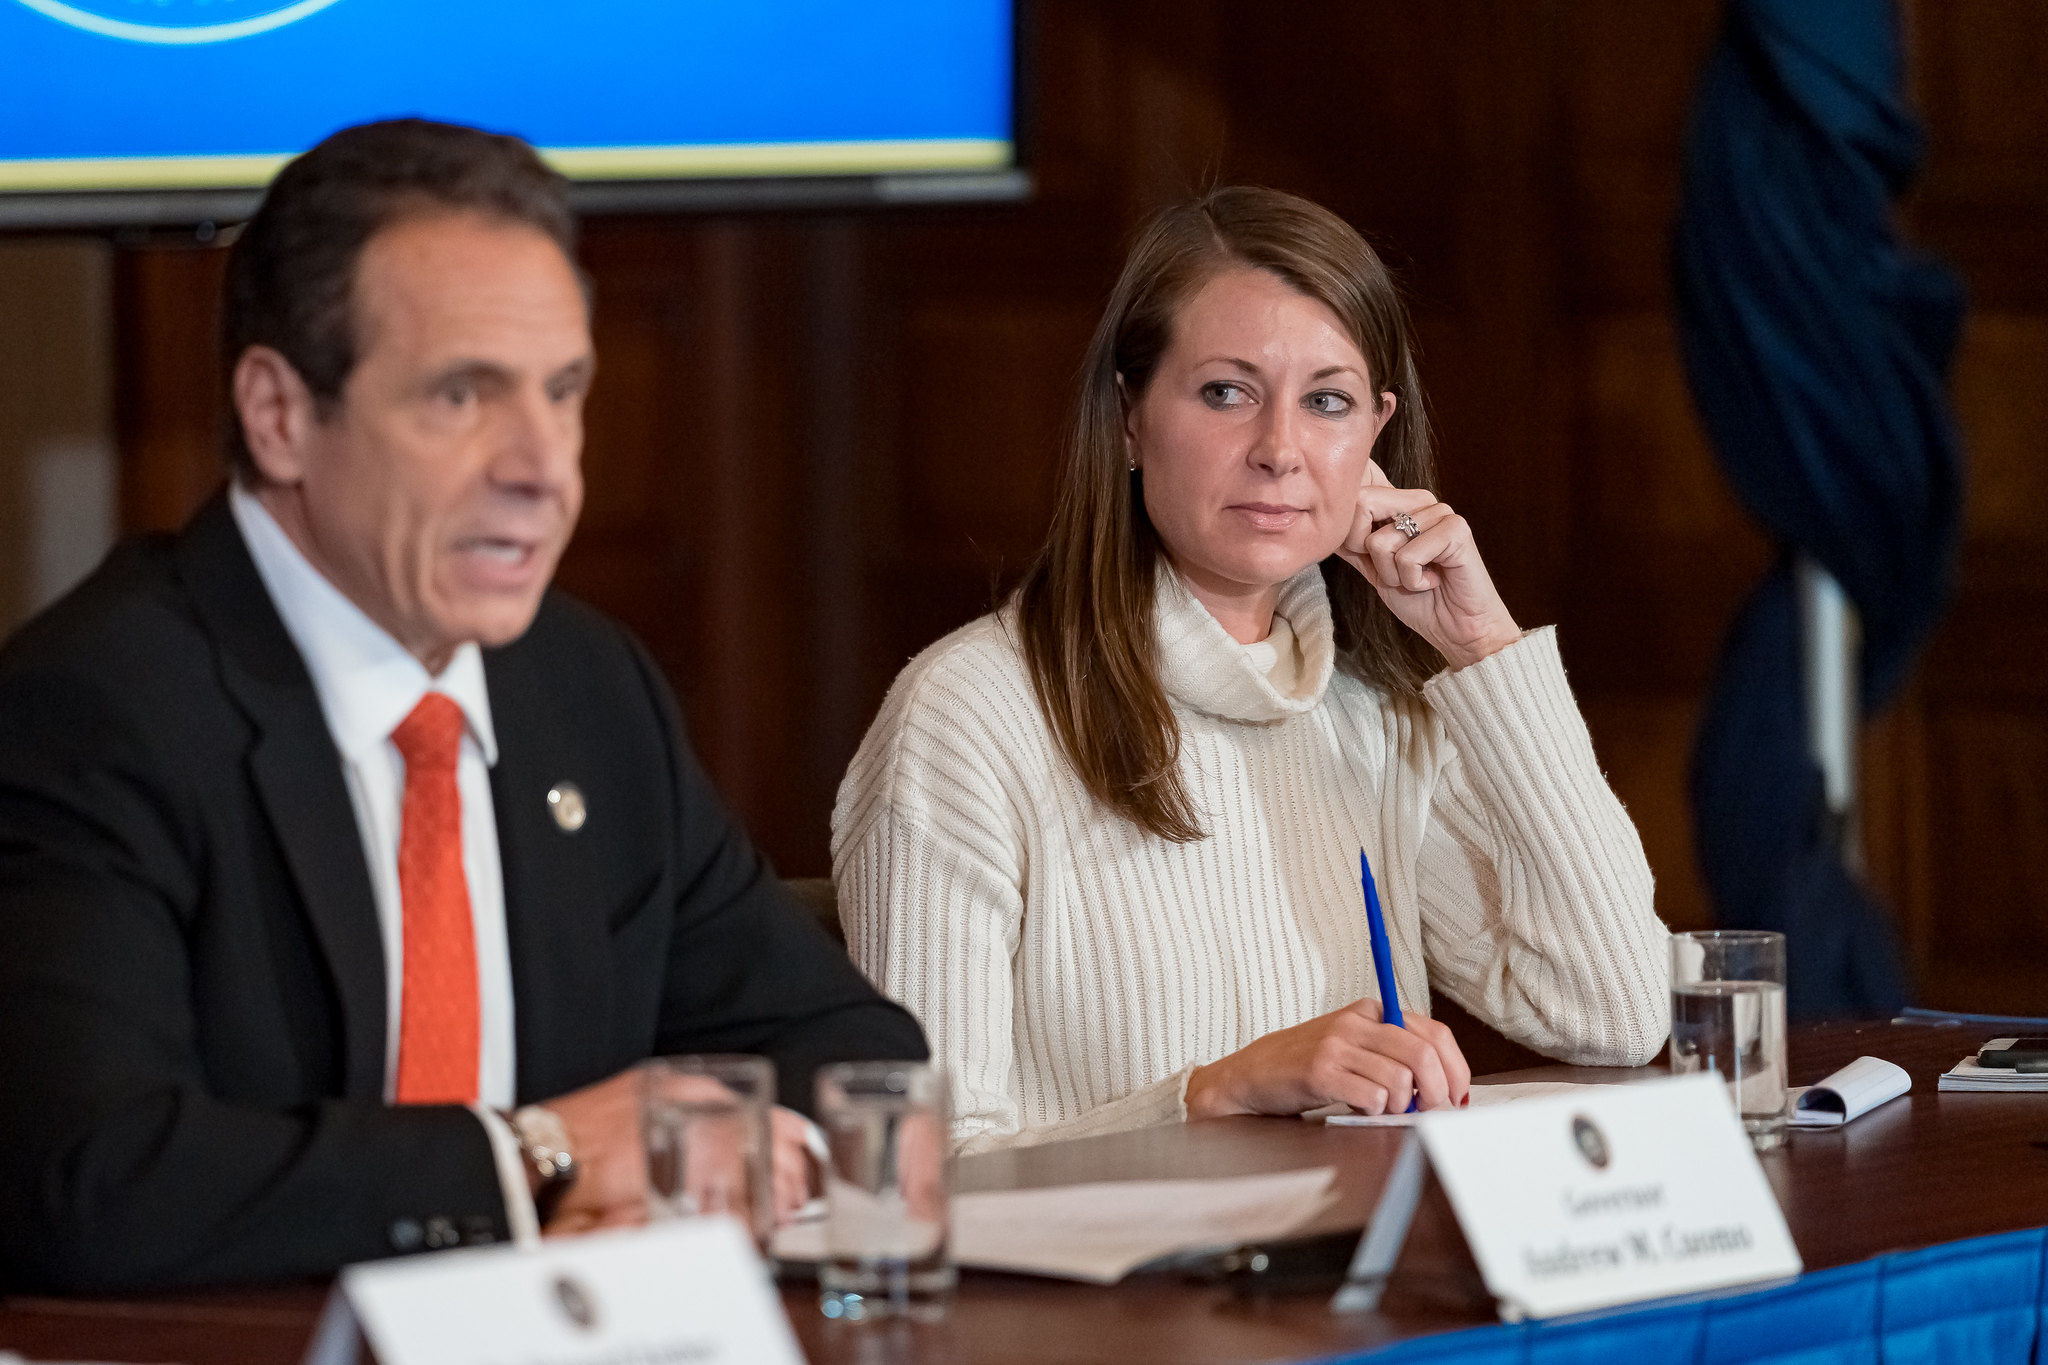 Secretary to the Governor Melissa DeRosa listens as Gov. Andrew Cuomo addresses the media at a press conference on March 6, 2020 (Photo by Mike Wren/Department of Health; courtesy of the Office of Gov. Andrew M. Cuomo)